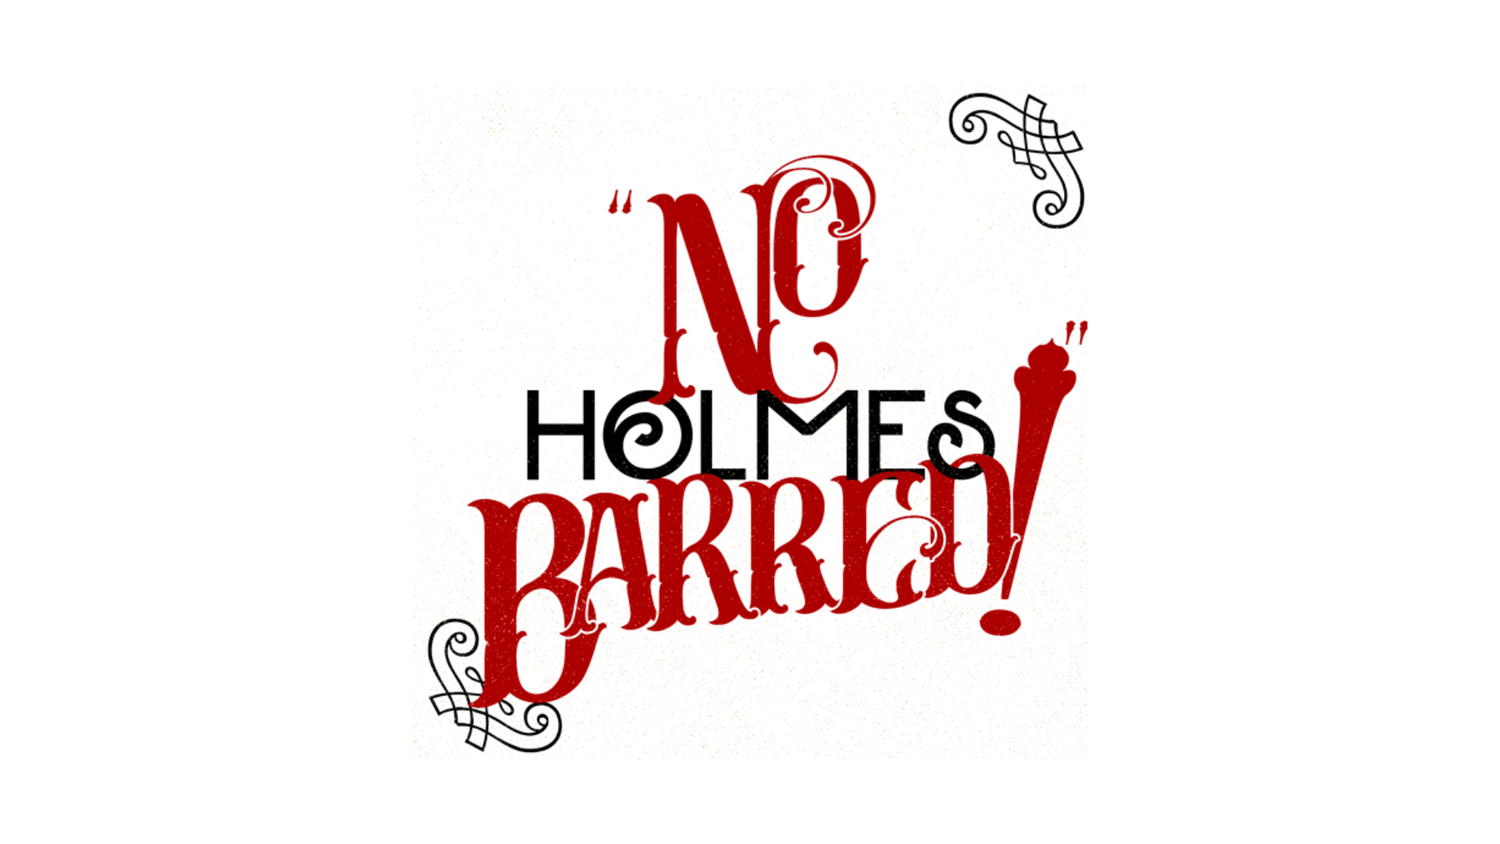 No Holmes Barred - a radio show podcast about serial killer H.H. Holmes